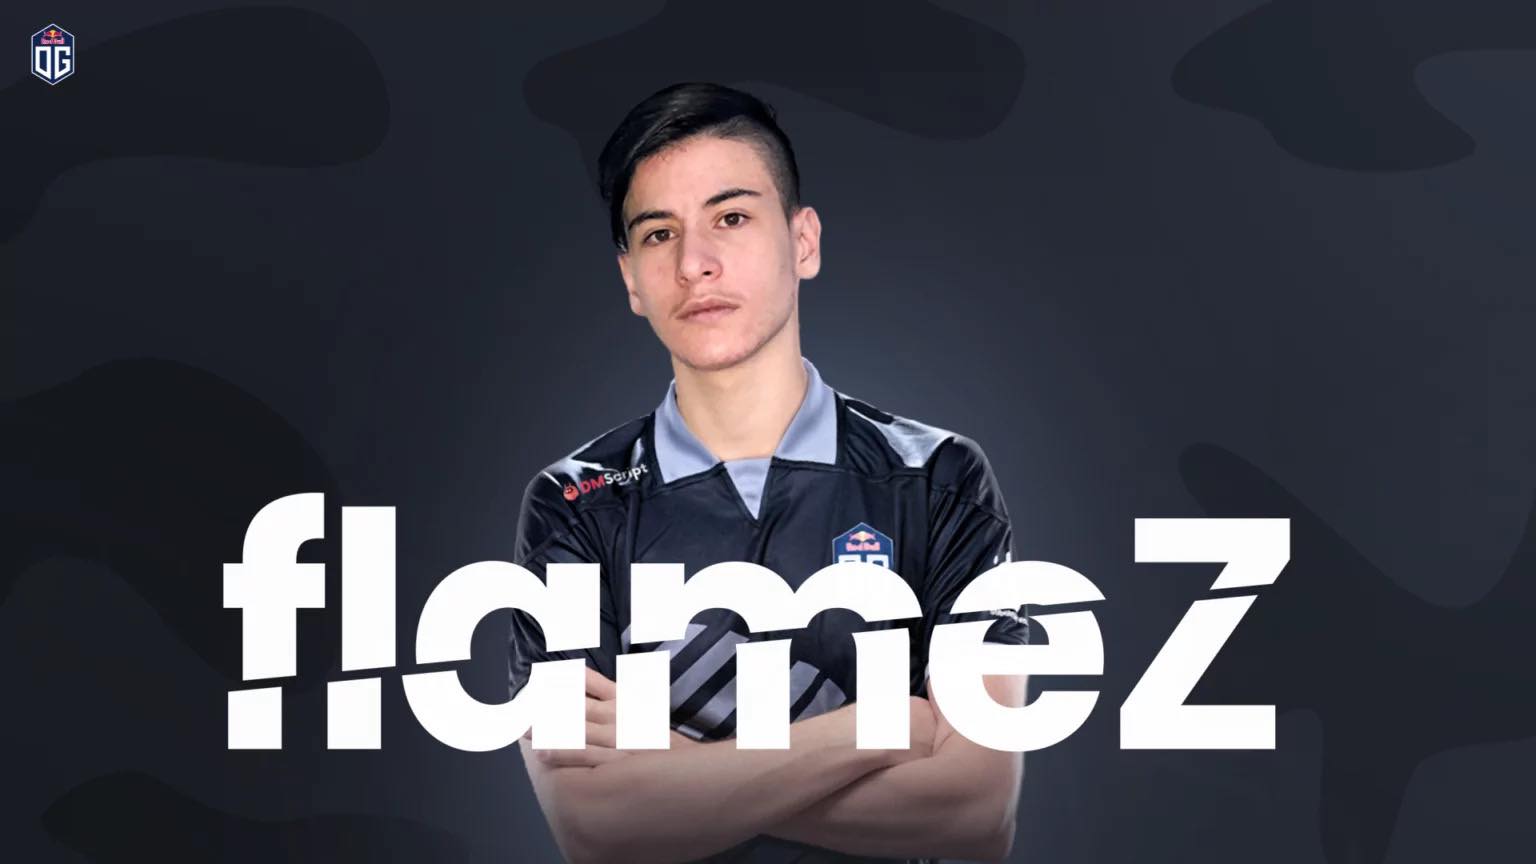 “Flamez” bolsters the OG CS:GO roster with his immense abilities